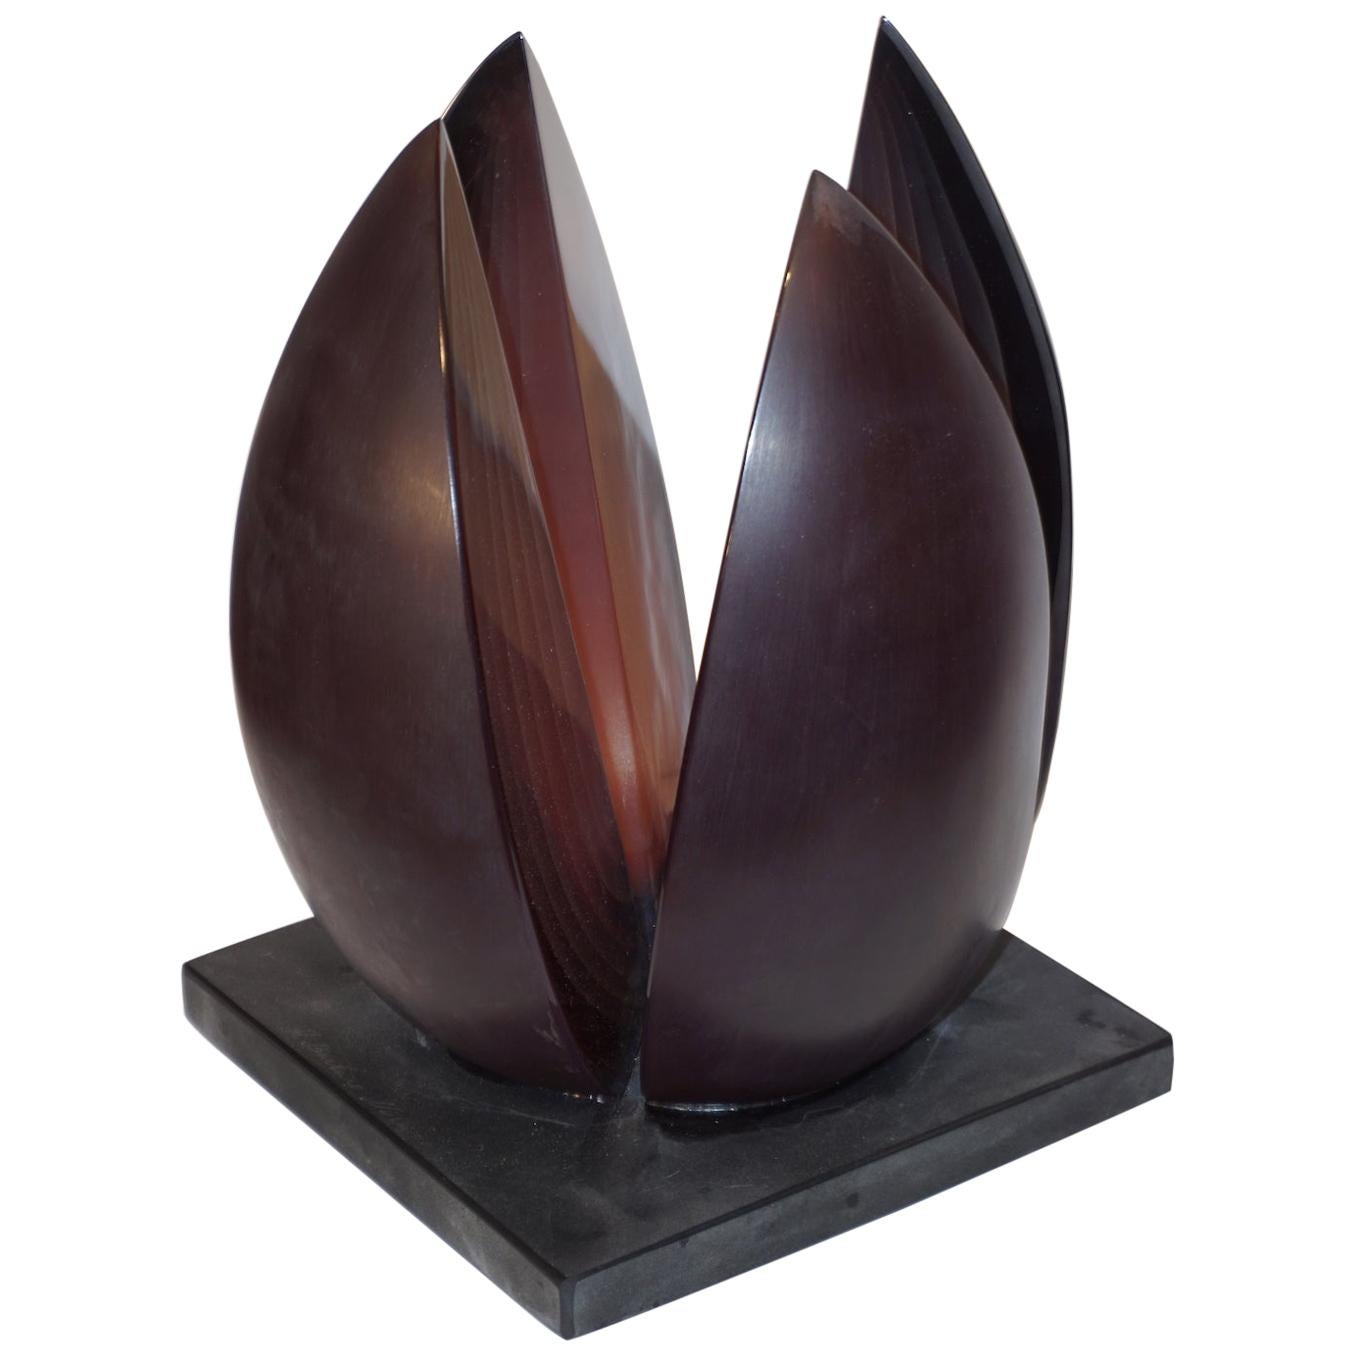 A. Barbaro Abstract Flower Sculpture in a Dark Plum Murano Glass on Slate Base